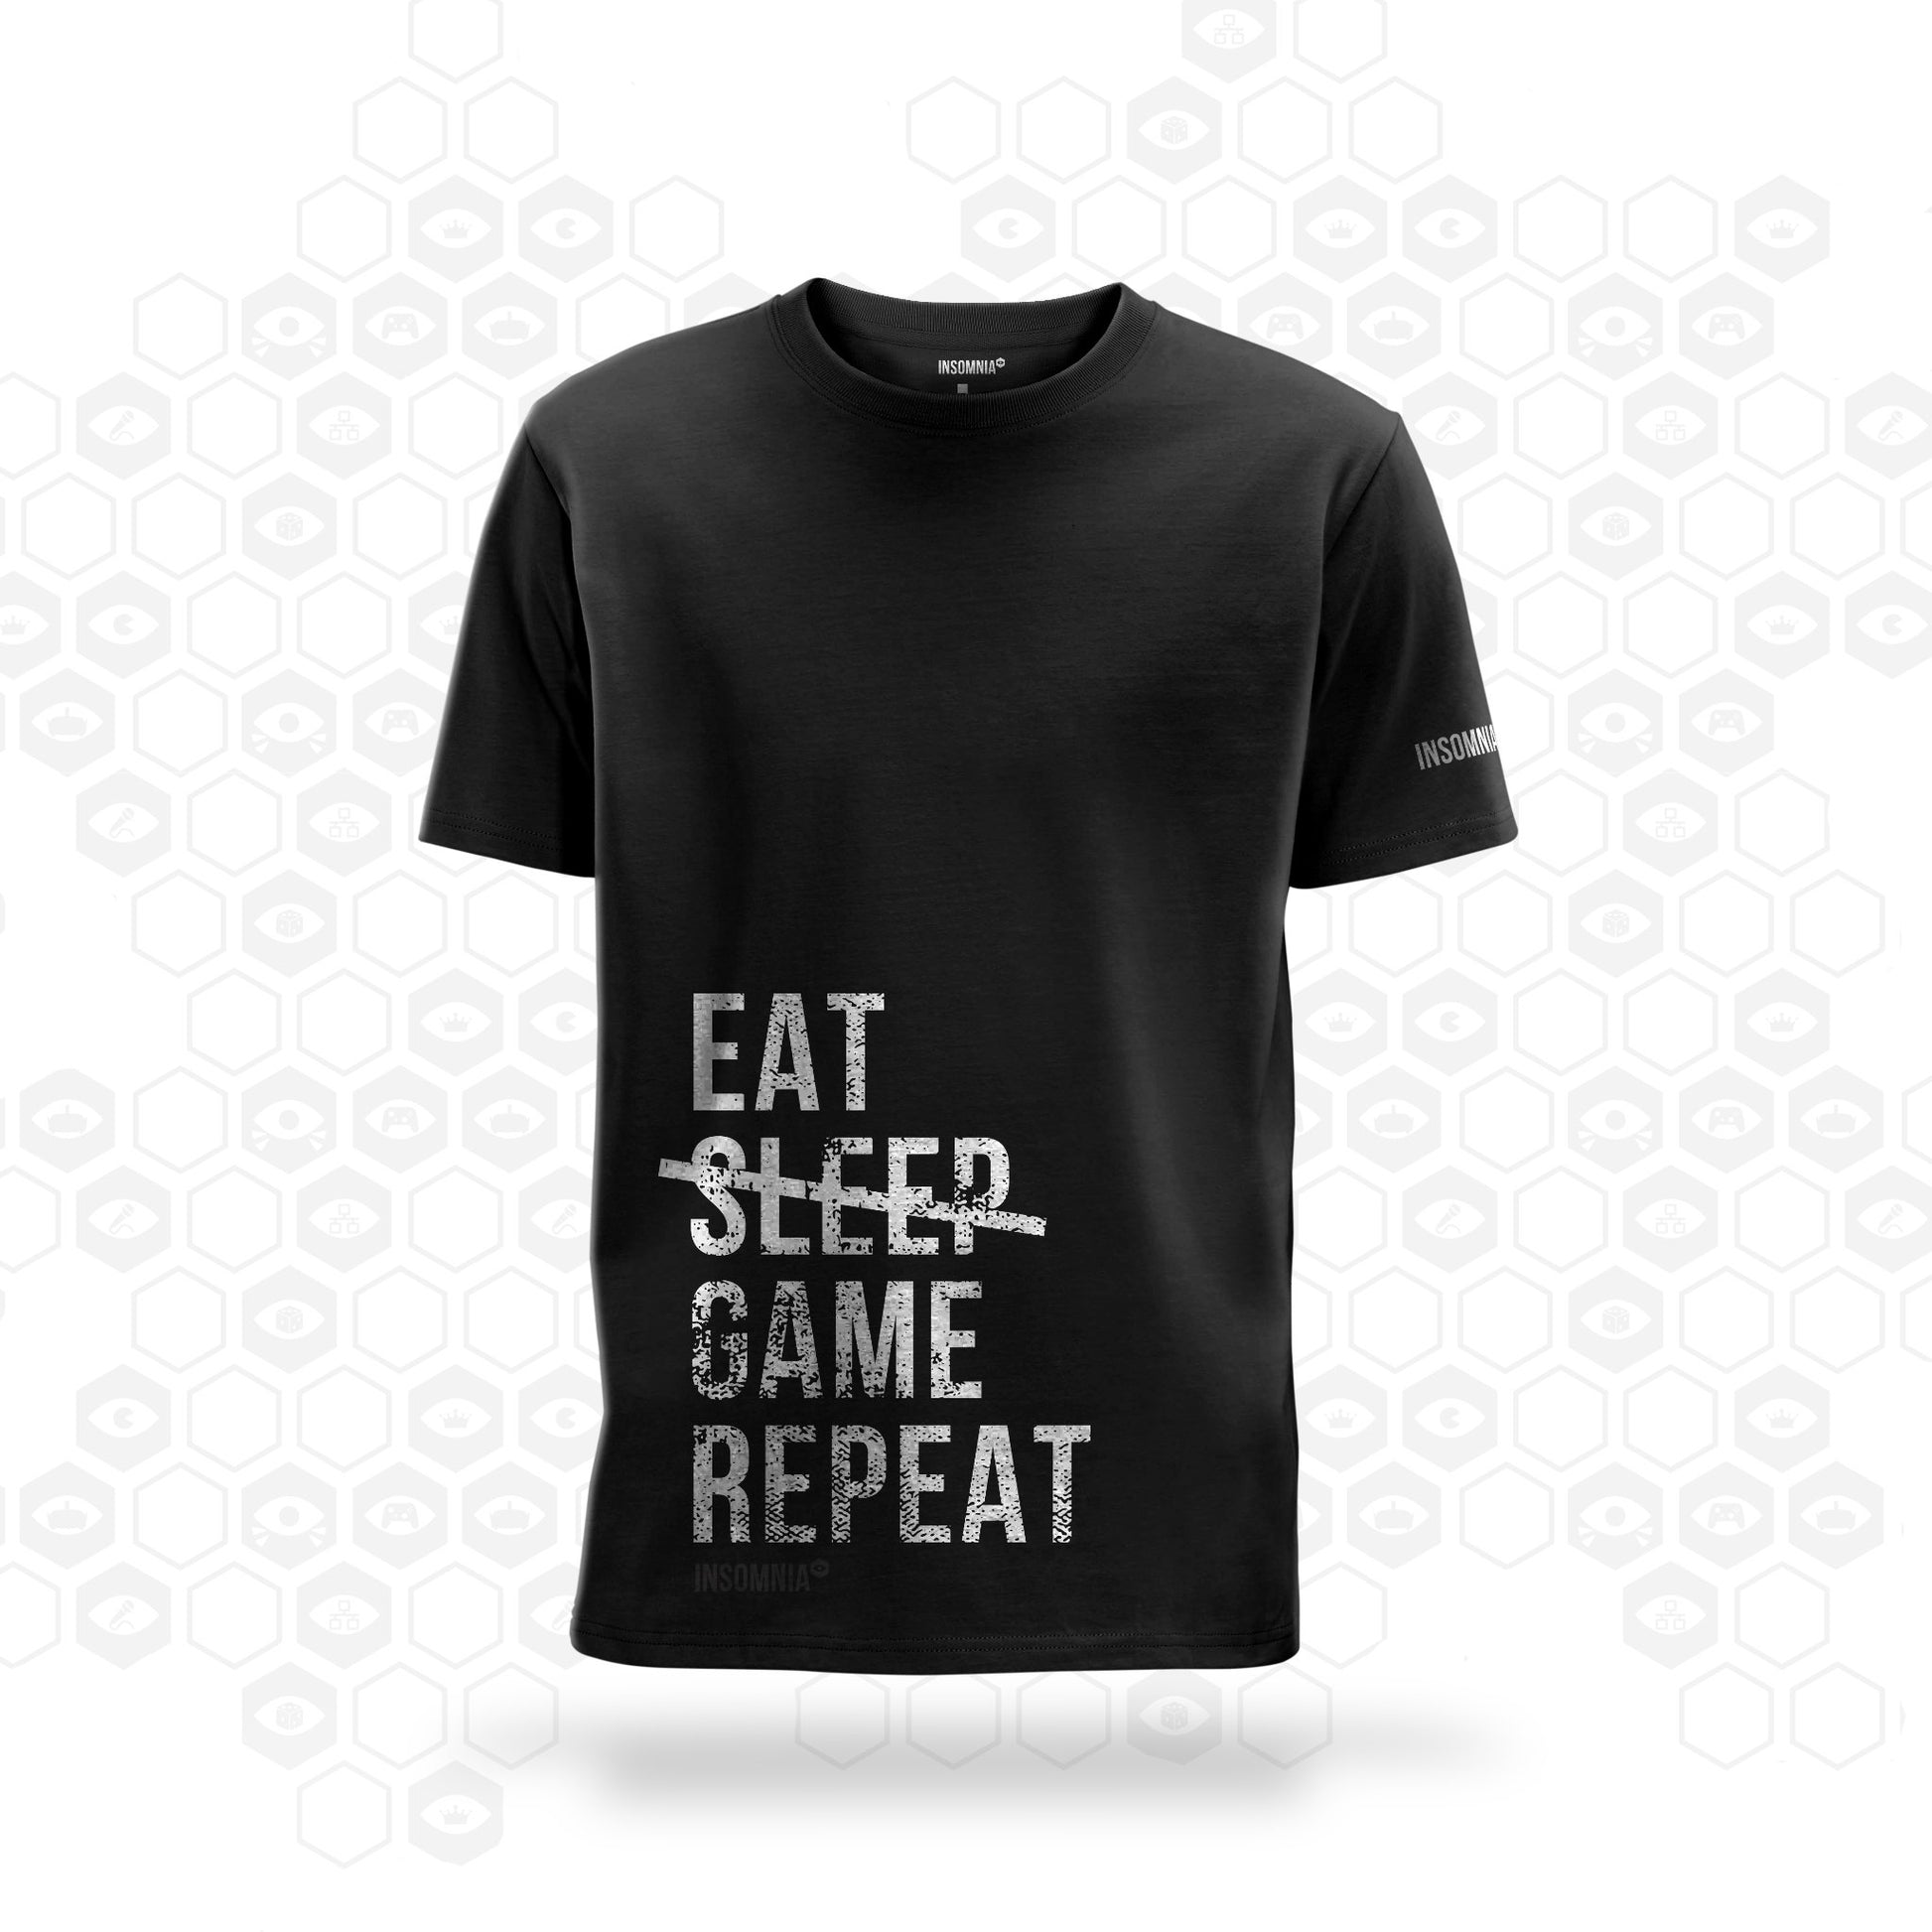 Black Insomnia T-Shirt with typographic Eat Sleep Game Repeat design